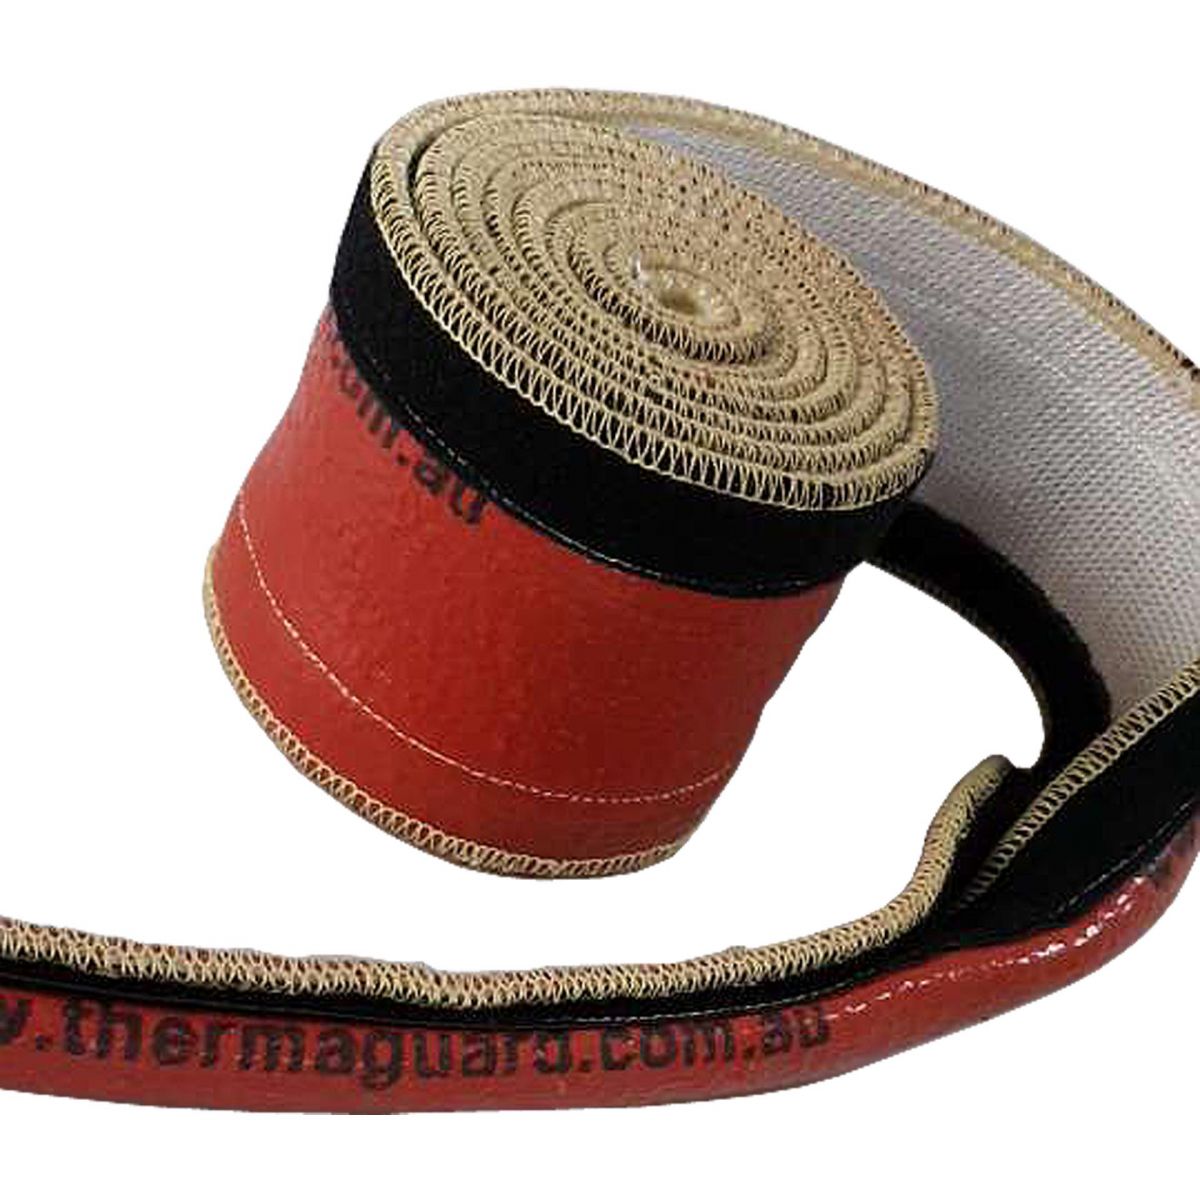 Thermaguard LinearWrap Fire Hose Protector